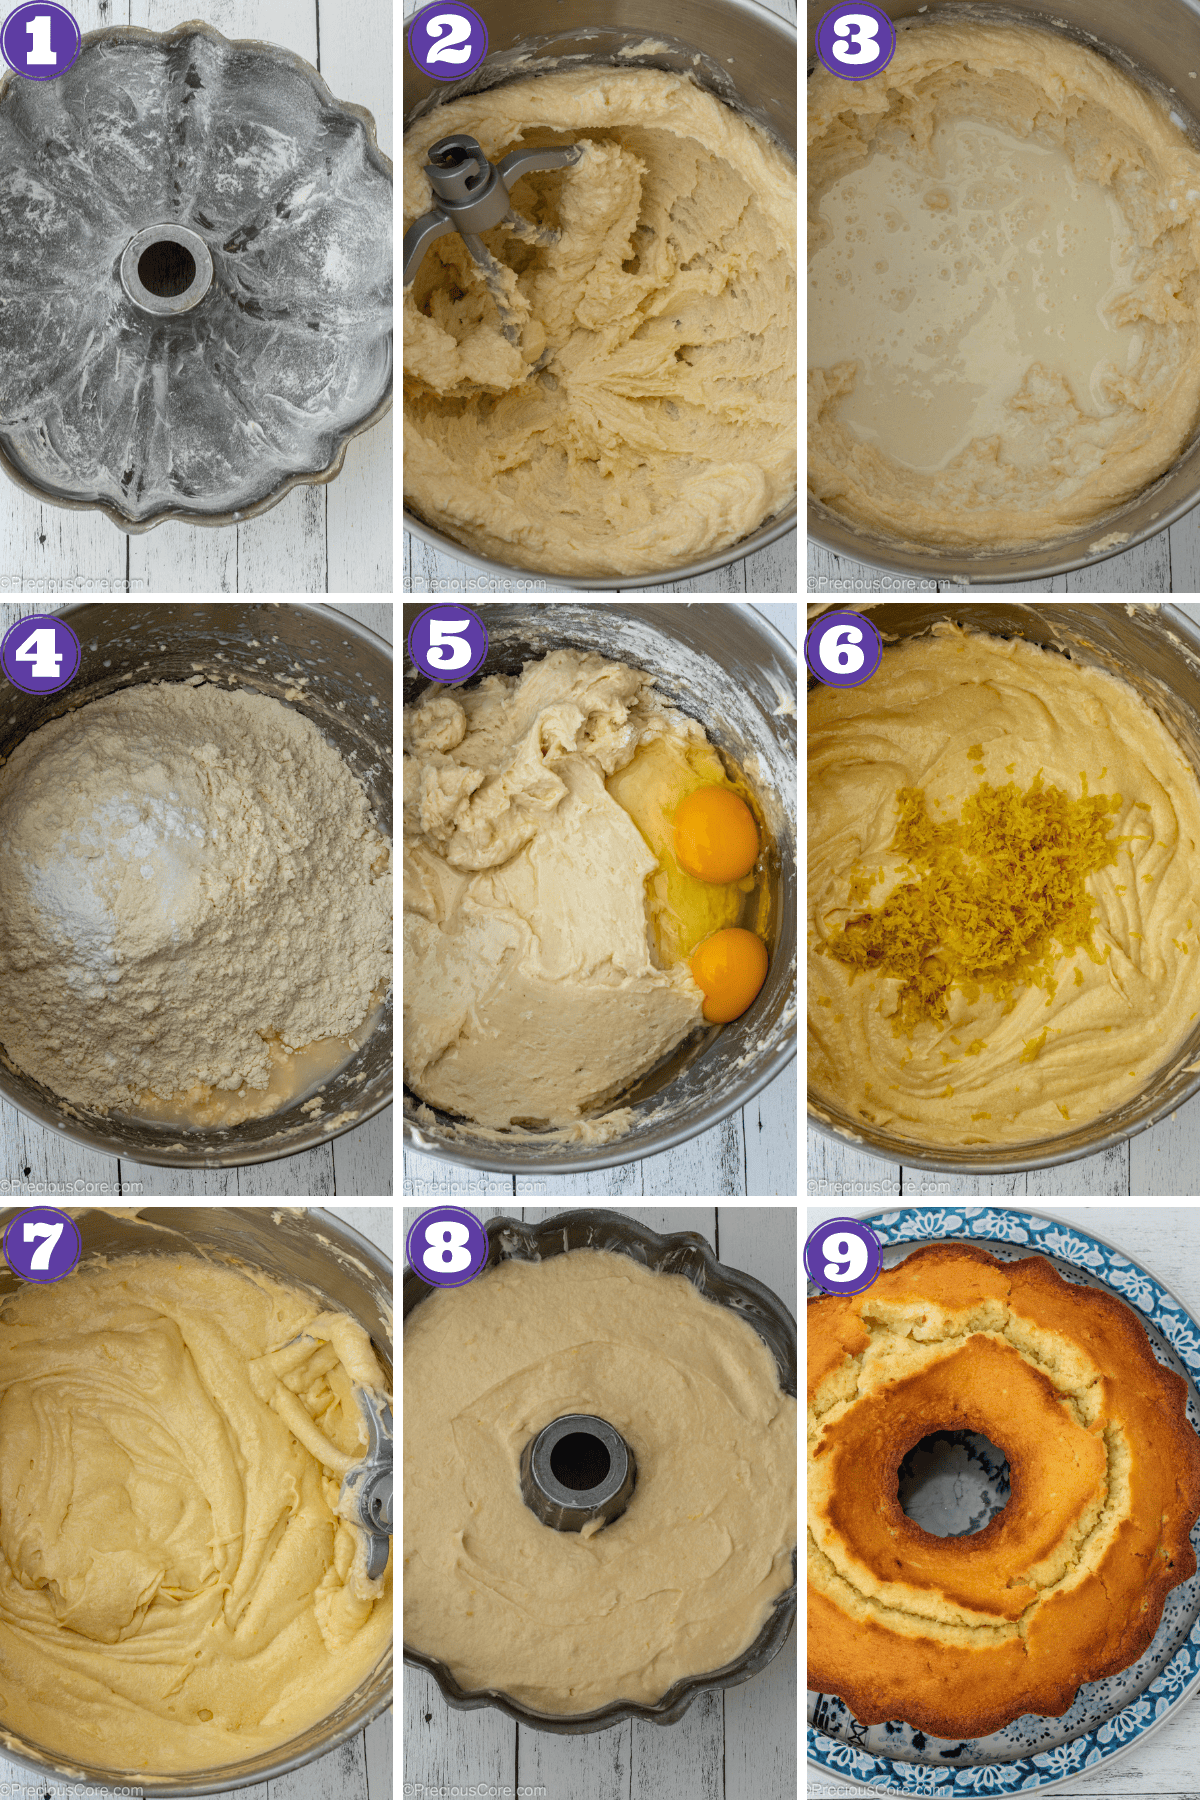 Step by step pictures for making lemon pound cake.